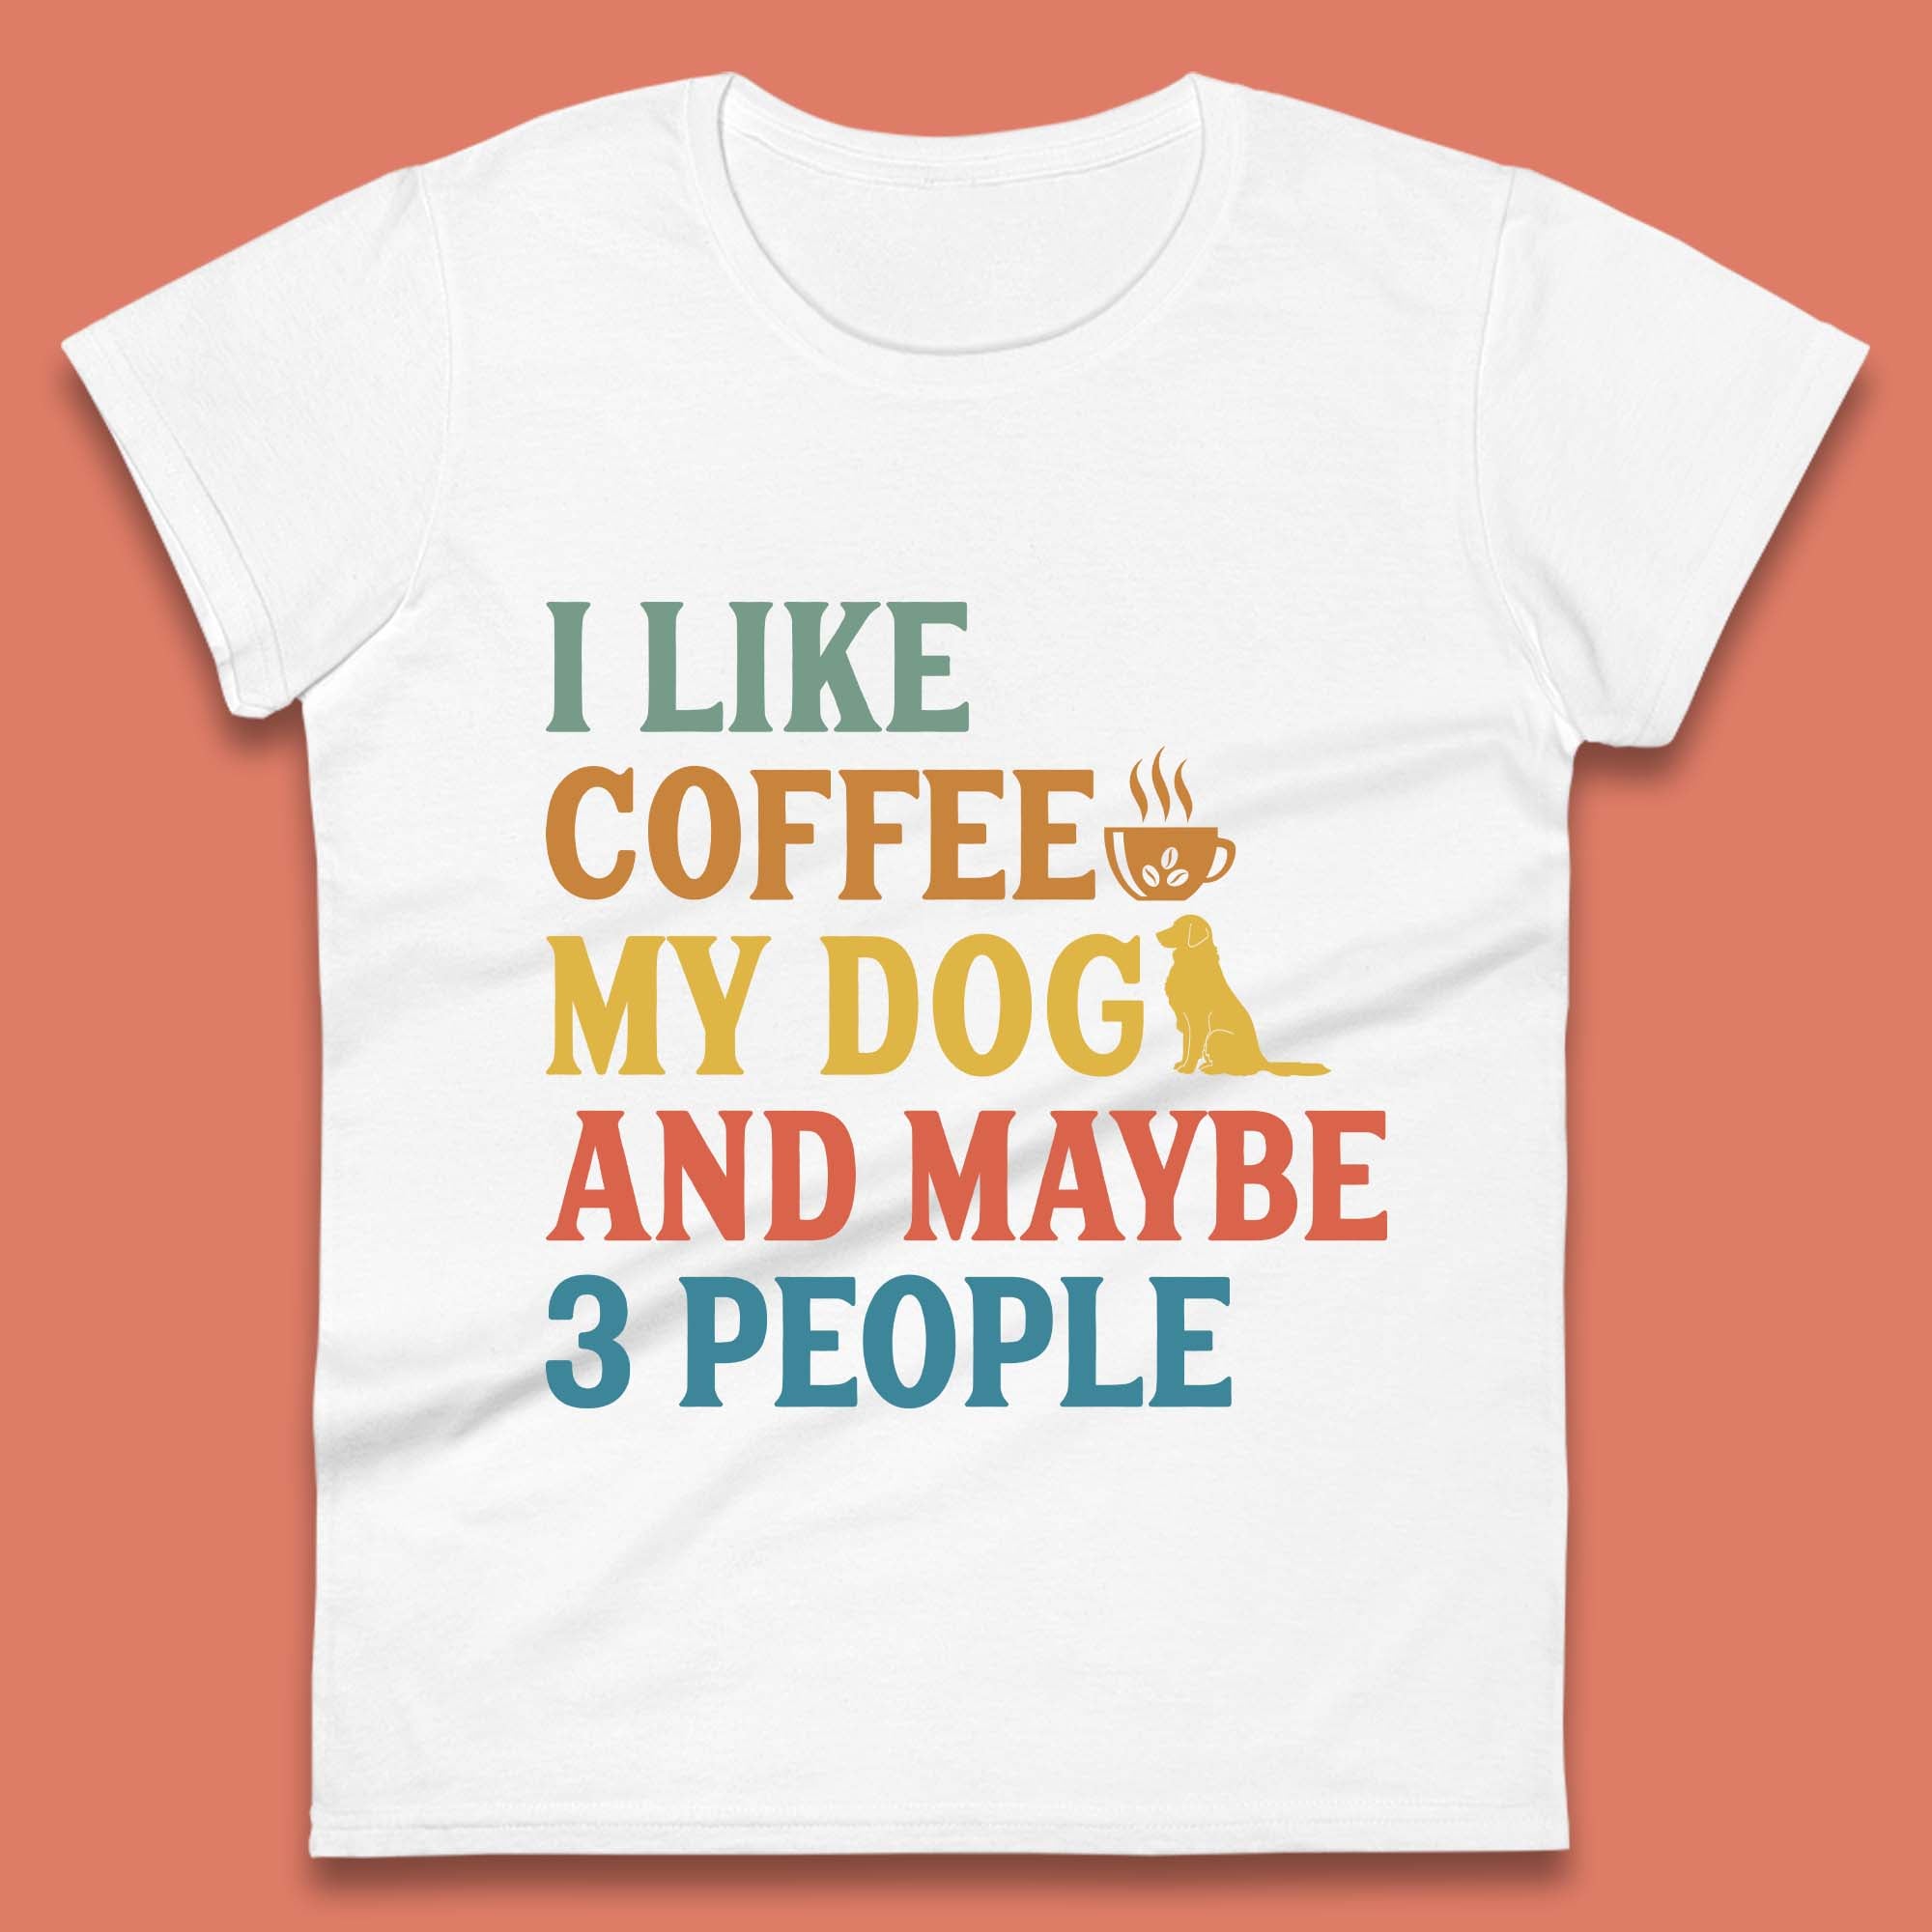 Dog and Coffee Women's T-Shirt